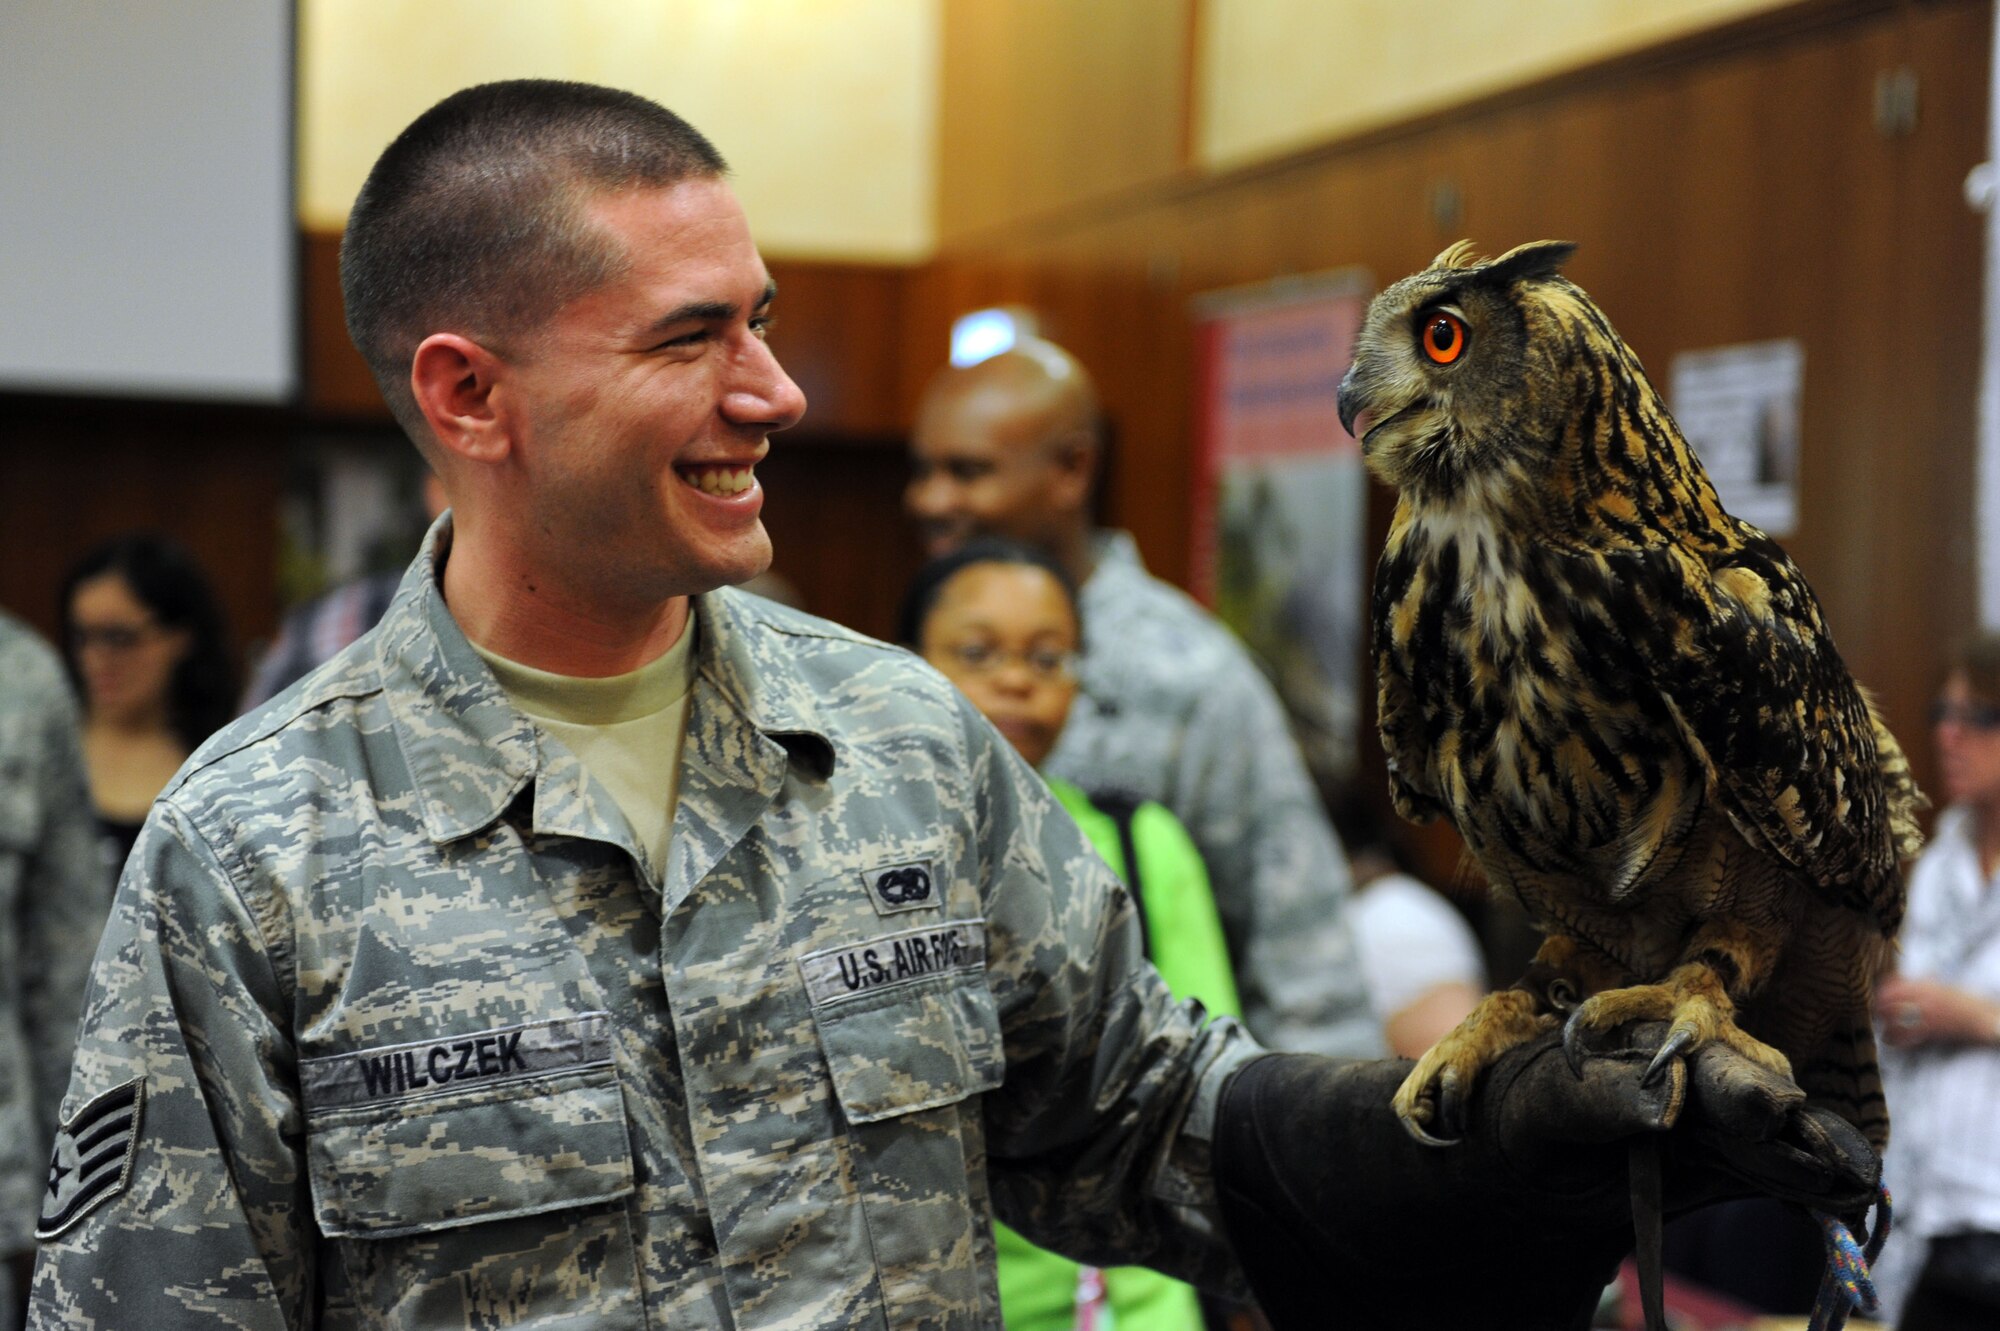 SPANGDAHLEM AIR BASE, Germany – Staff Sgt. Matthew Wilczek, 52nd Equipment Maintenance Squadron, holds a Eurasian Eagle-Owl from the Eifel Park in Gondorf during the seventh annual Explore the Eifel fair at Club Eifel here May 11. The event had more than 200 exhibitors from Germany, Belgium and Luxembourg providing travel information on hiking trips and hot-air balloon rides, prizes, free samples, wine tastings, and more. This event gave attendees the chance to sign up for tours and adventures taking place May 18-20 in the Eifel area. (U.S. Air Force photo by Senior Airman Christopher Toon/Released)